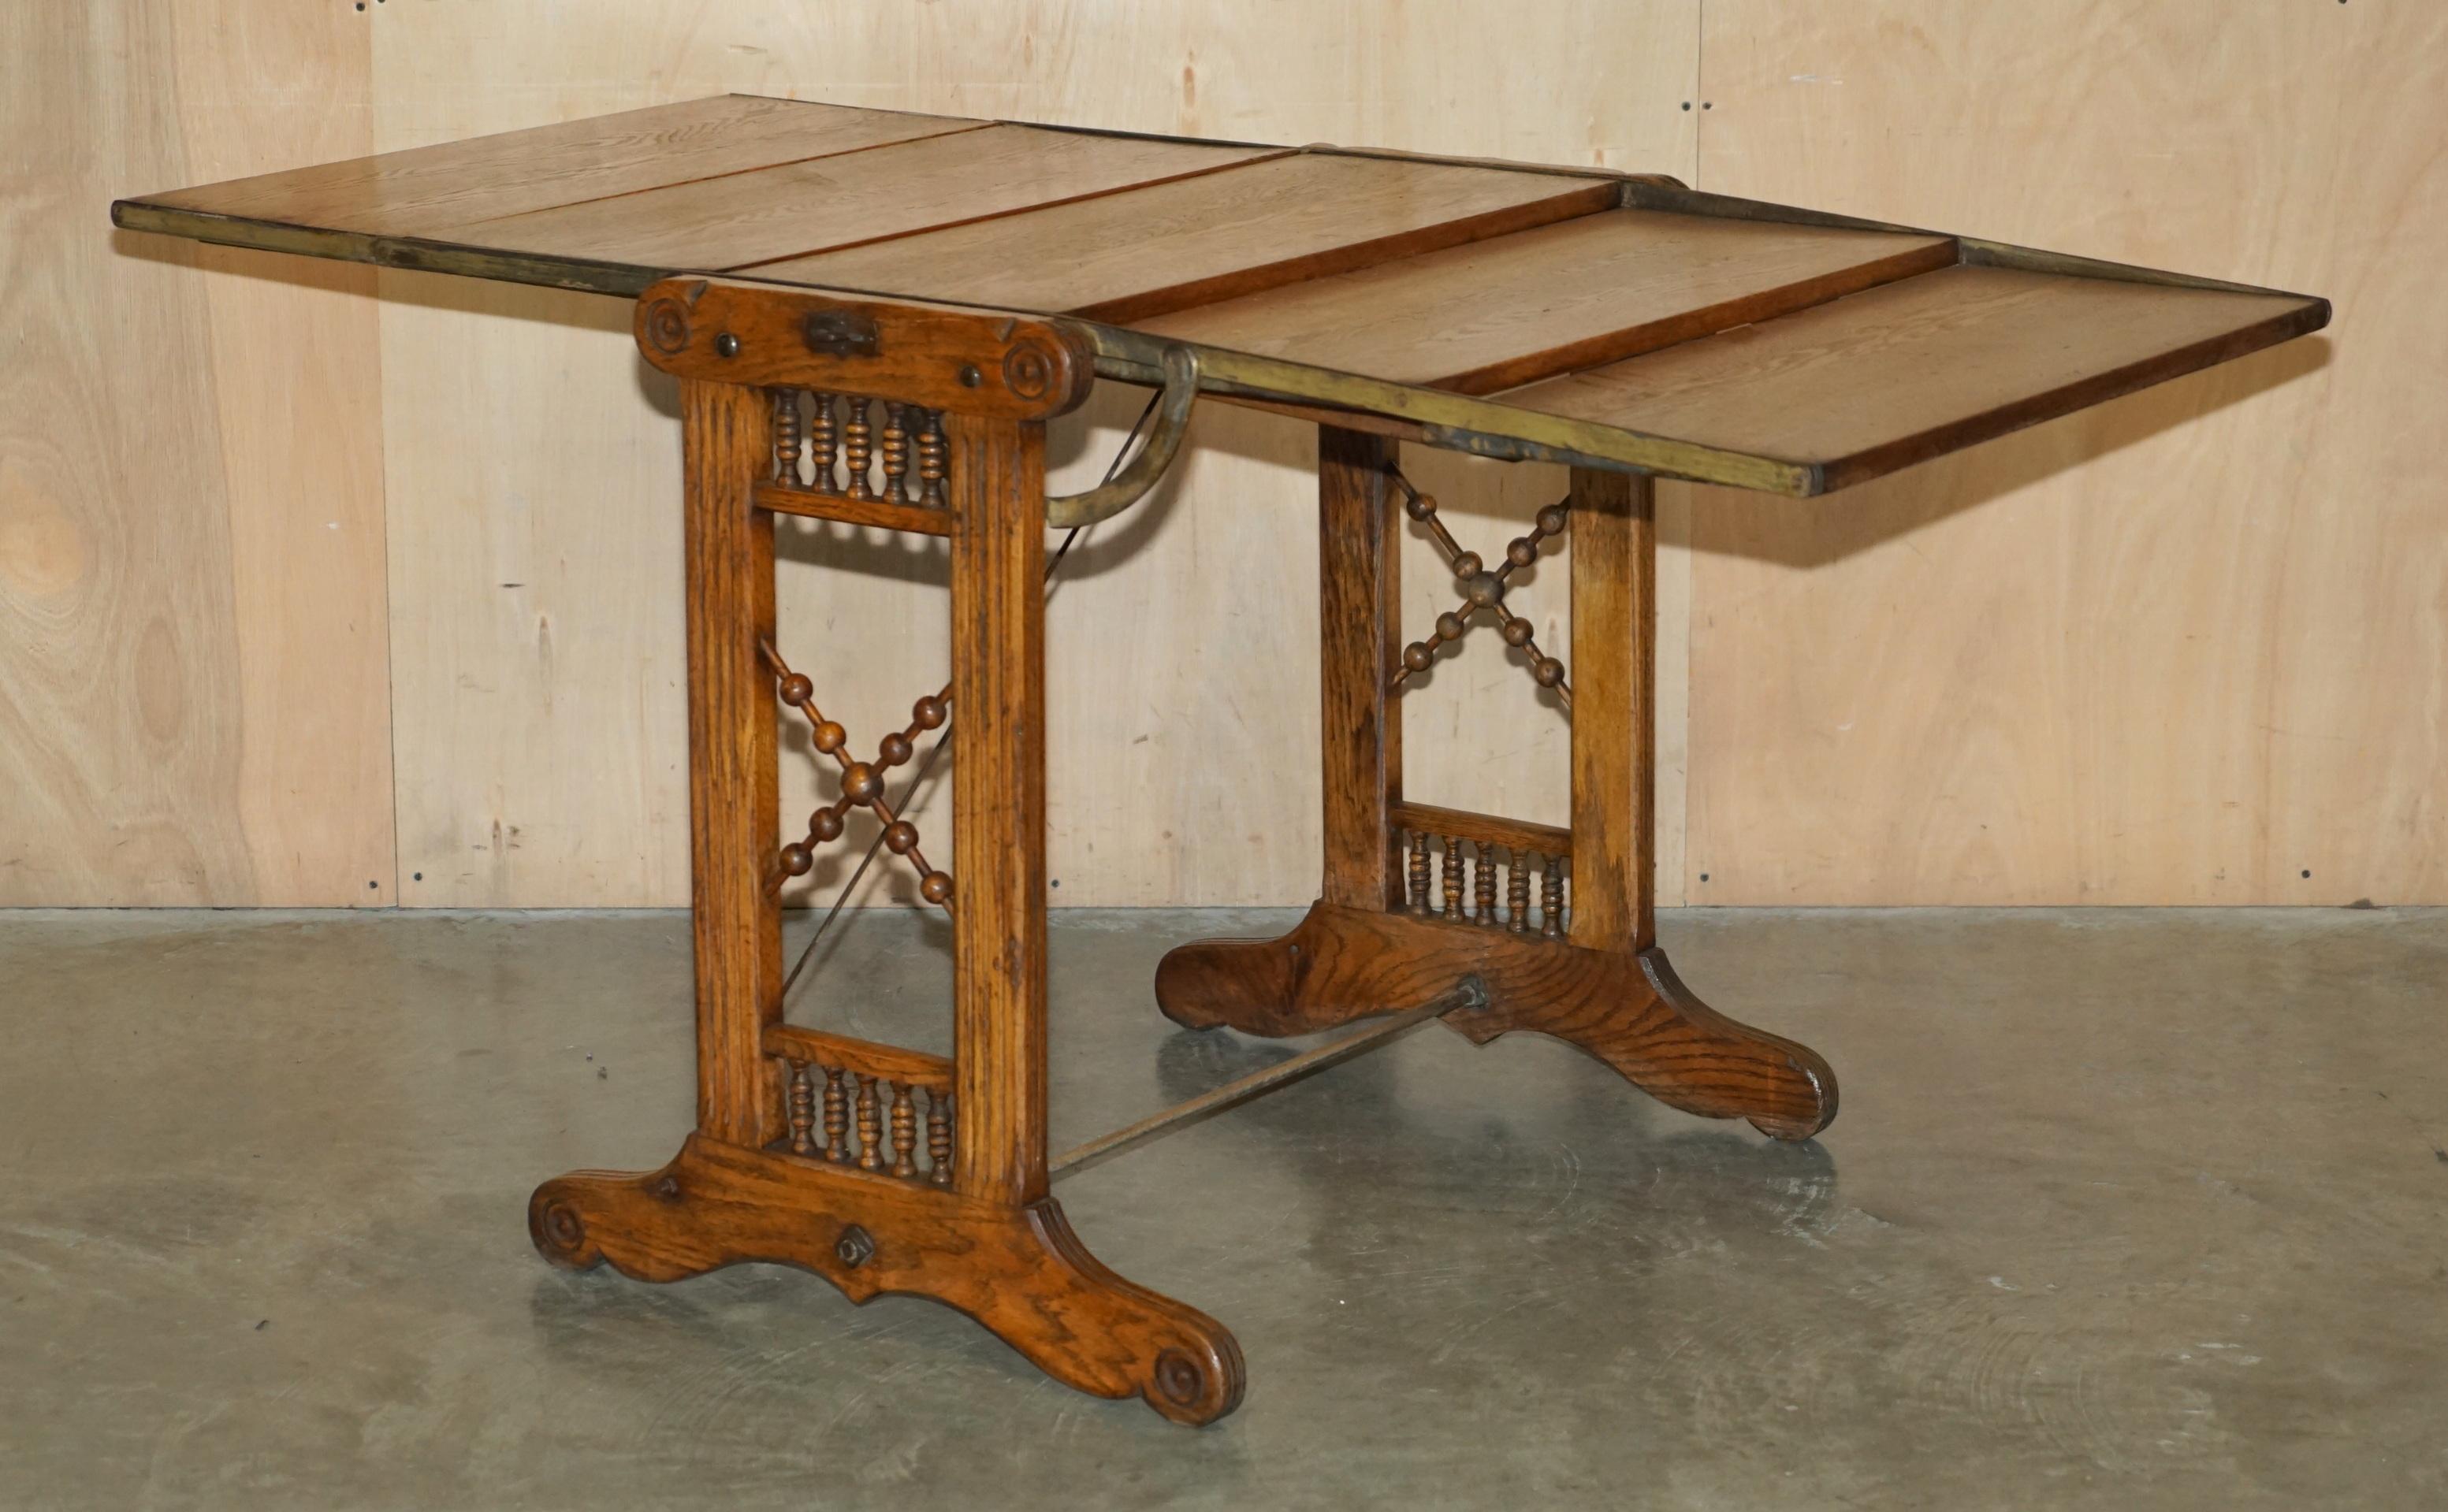 FULLY RESTORED CiRCA 1910 BOECKH BROTHERS METAMORPHIC BAKERS TABLE BOOKCASE For Sale 9